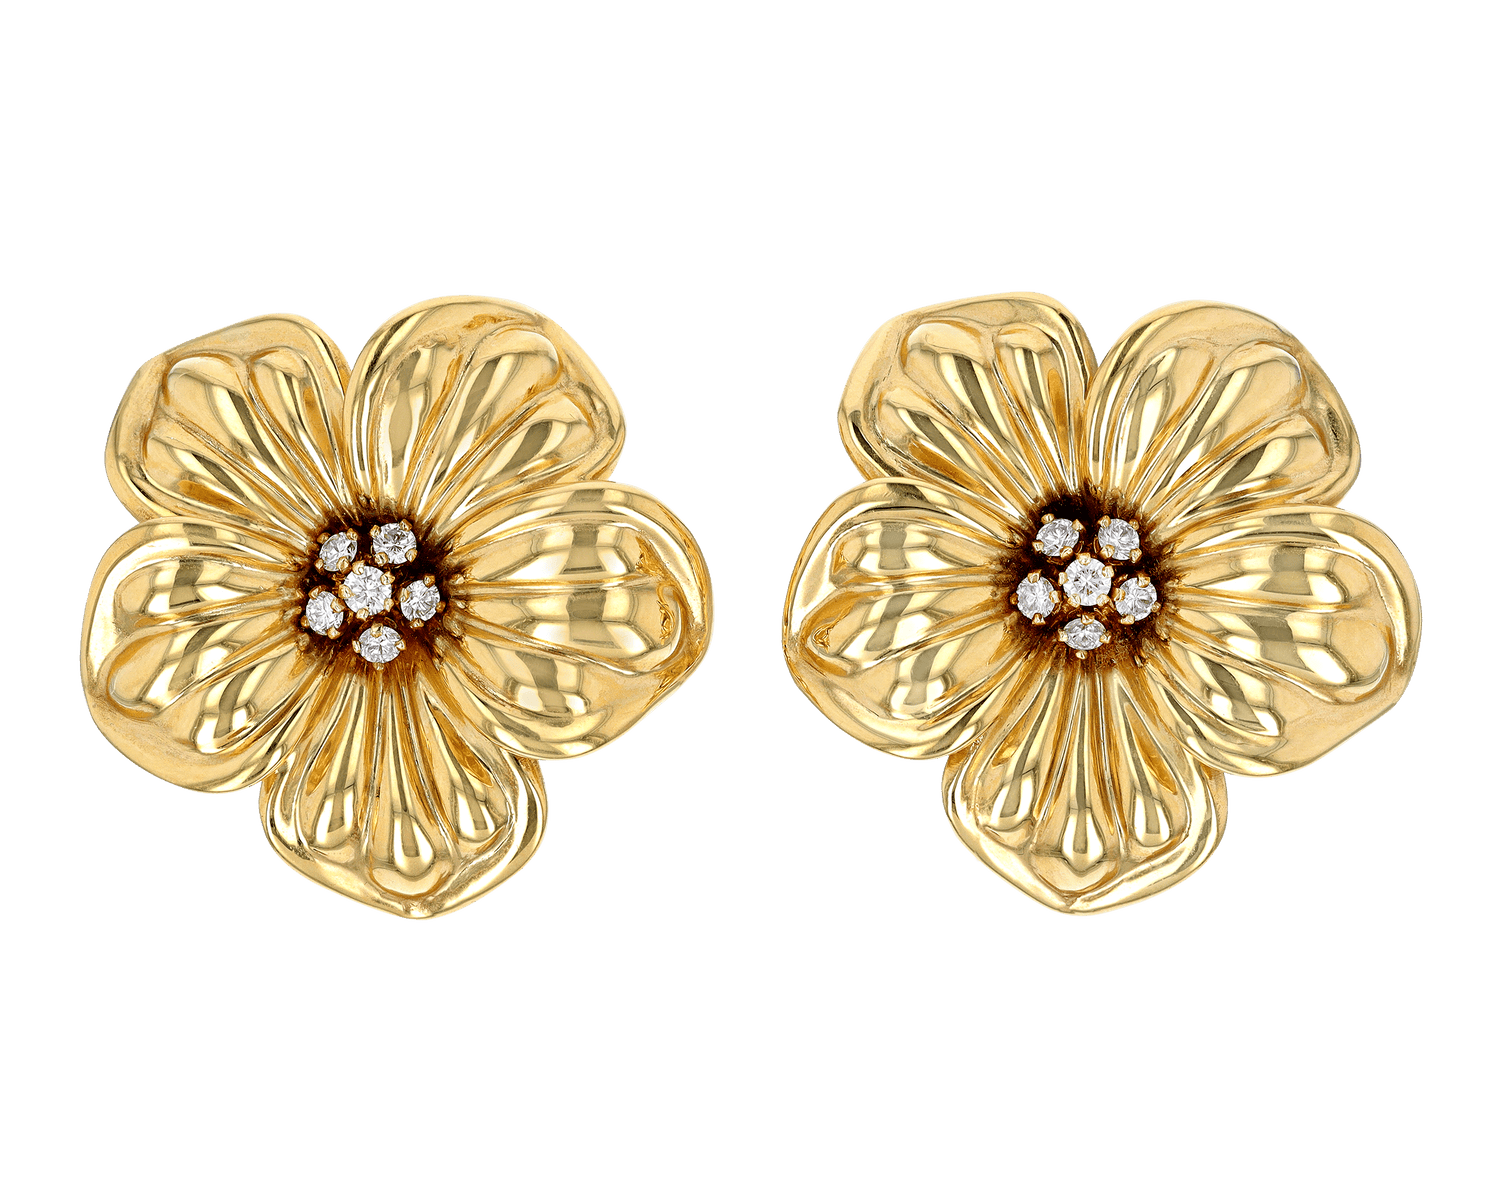 Gold and Diamond Flower Earrings by Van Cleef and Arpels